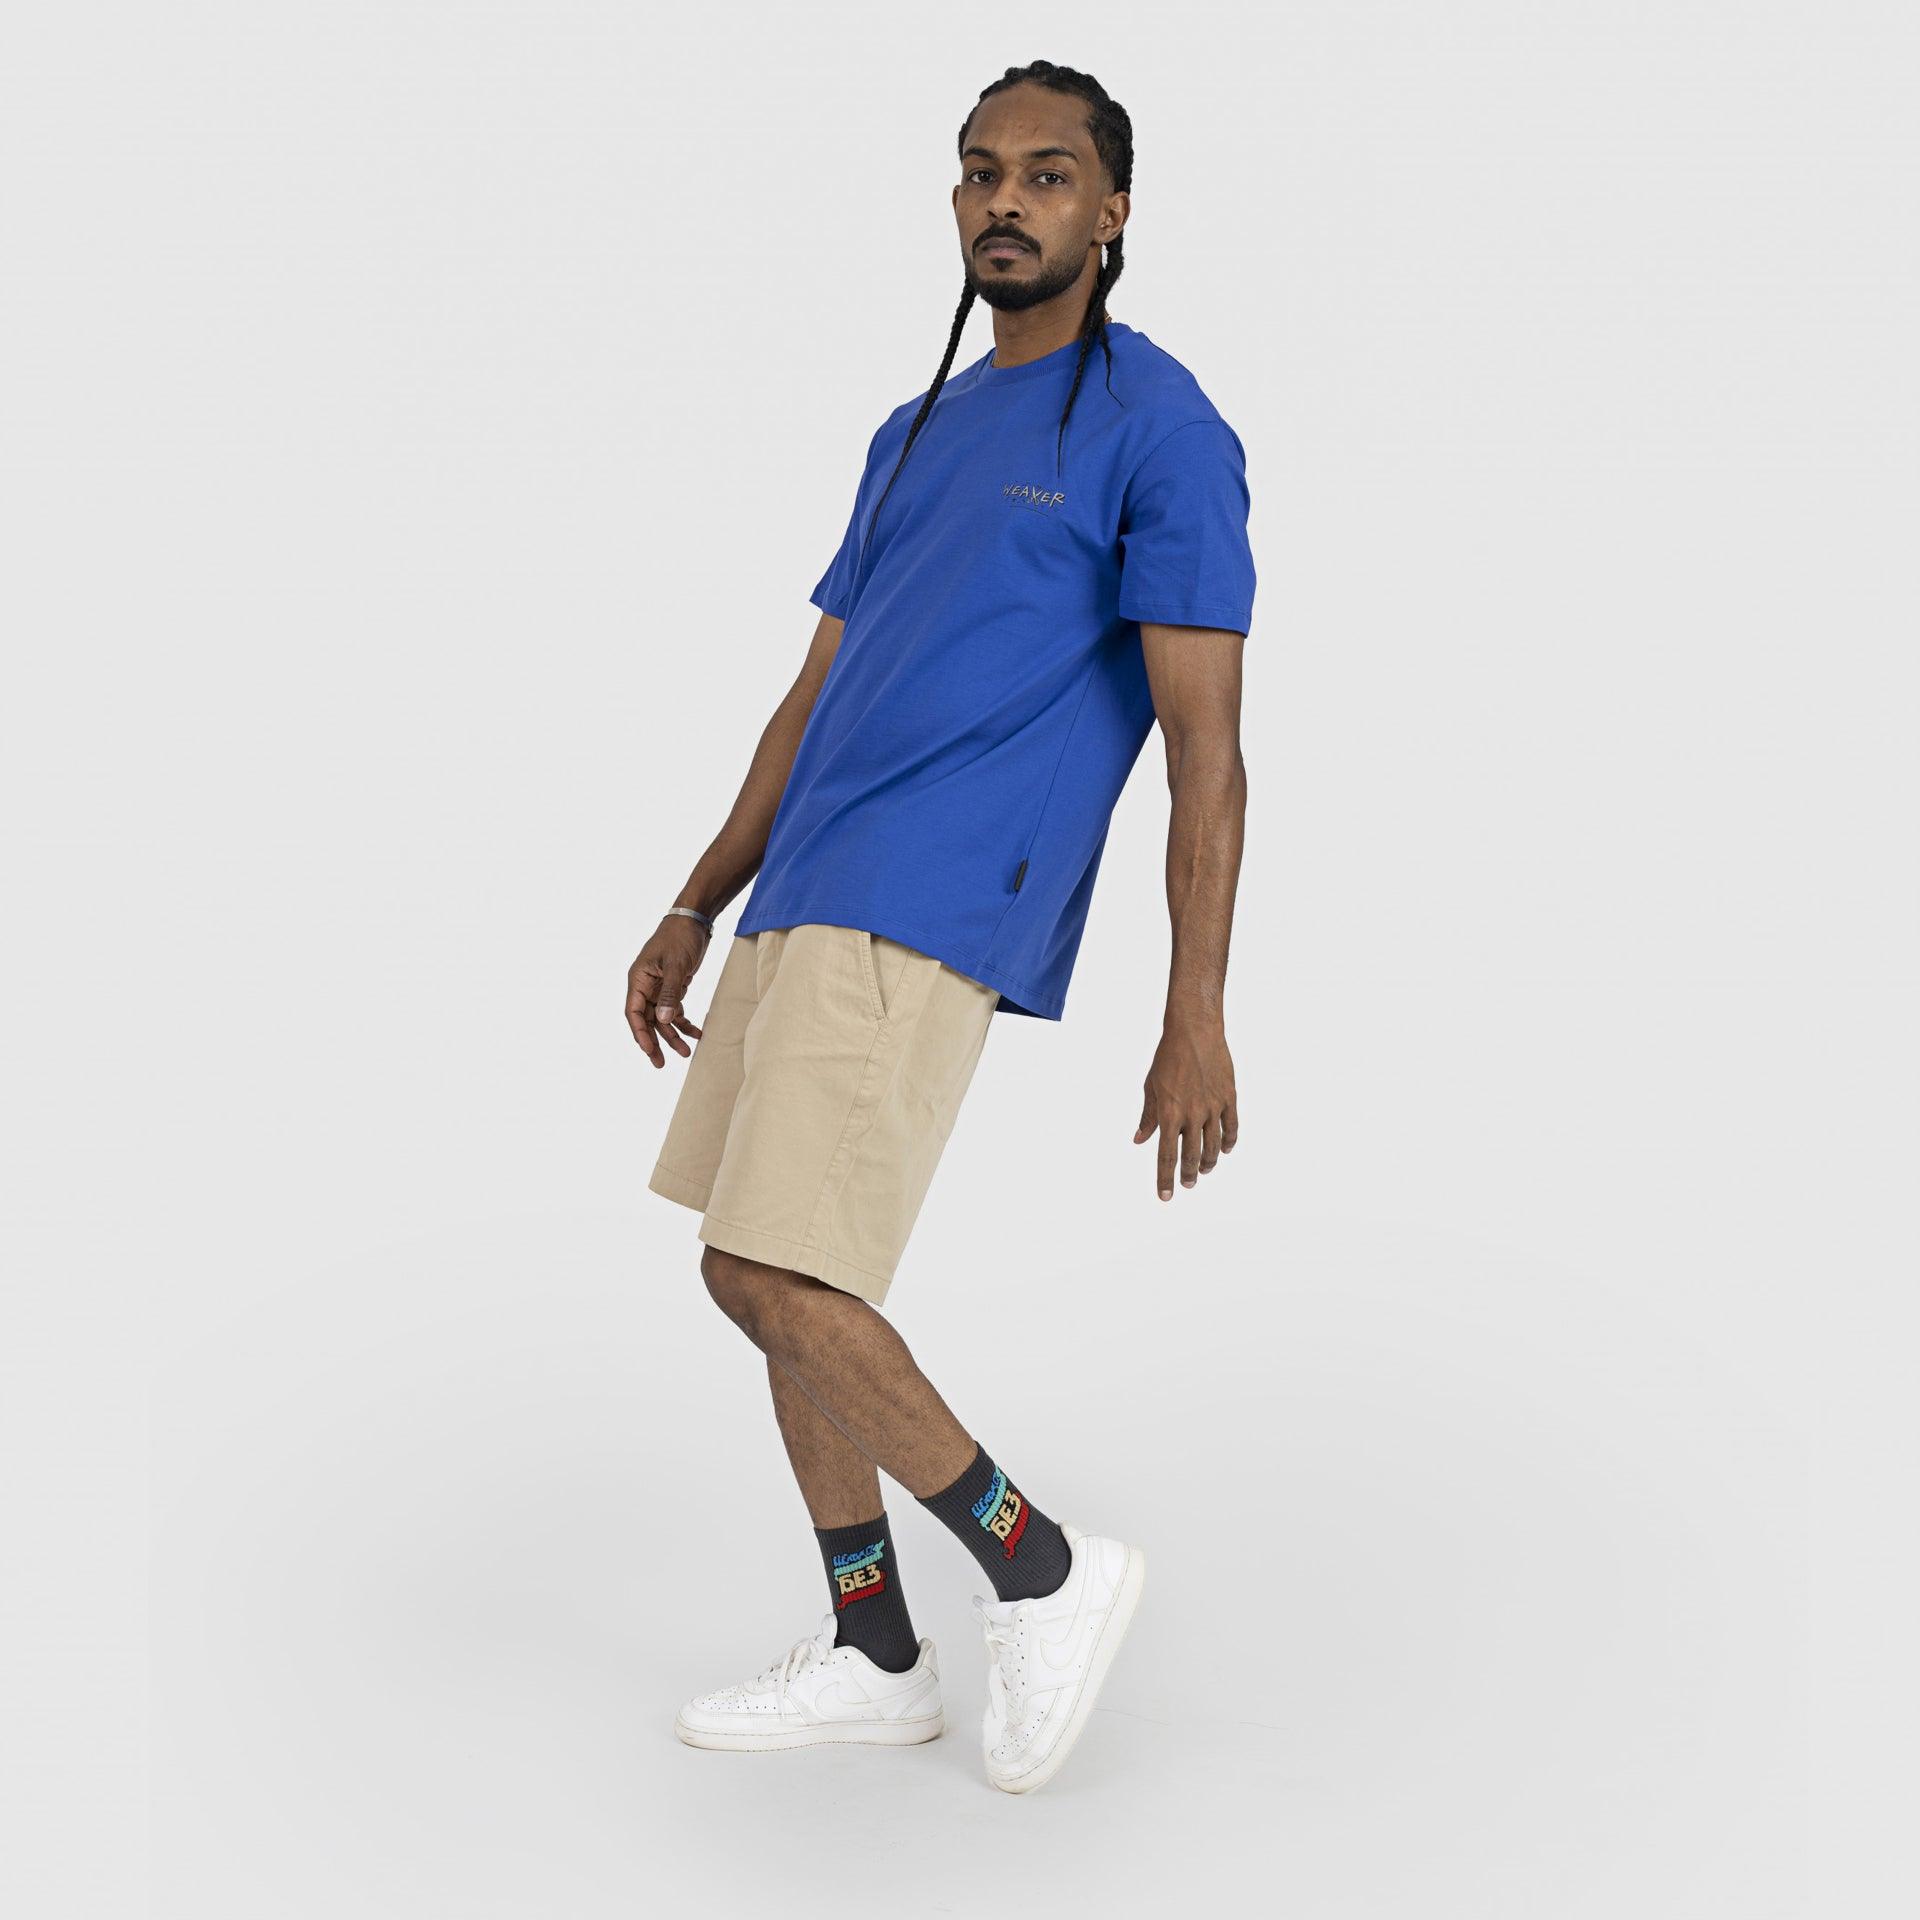 Blue Classic T-Shirt From Weaver Design - WECRE8